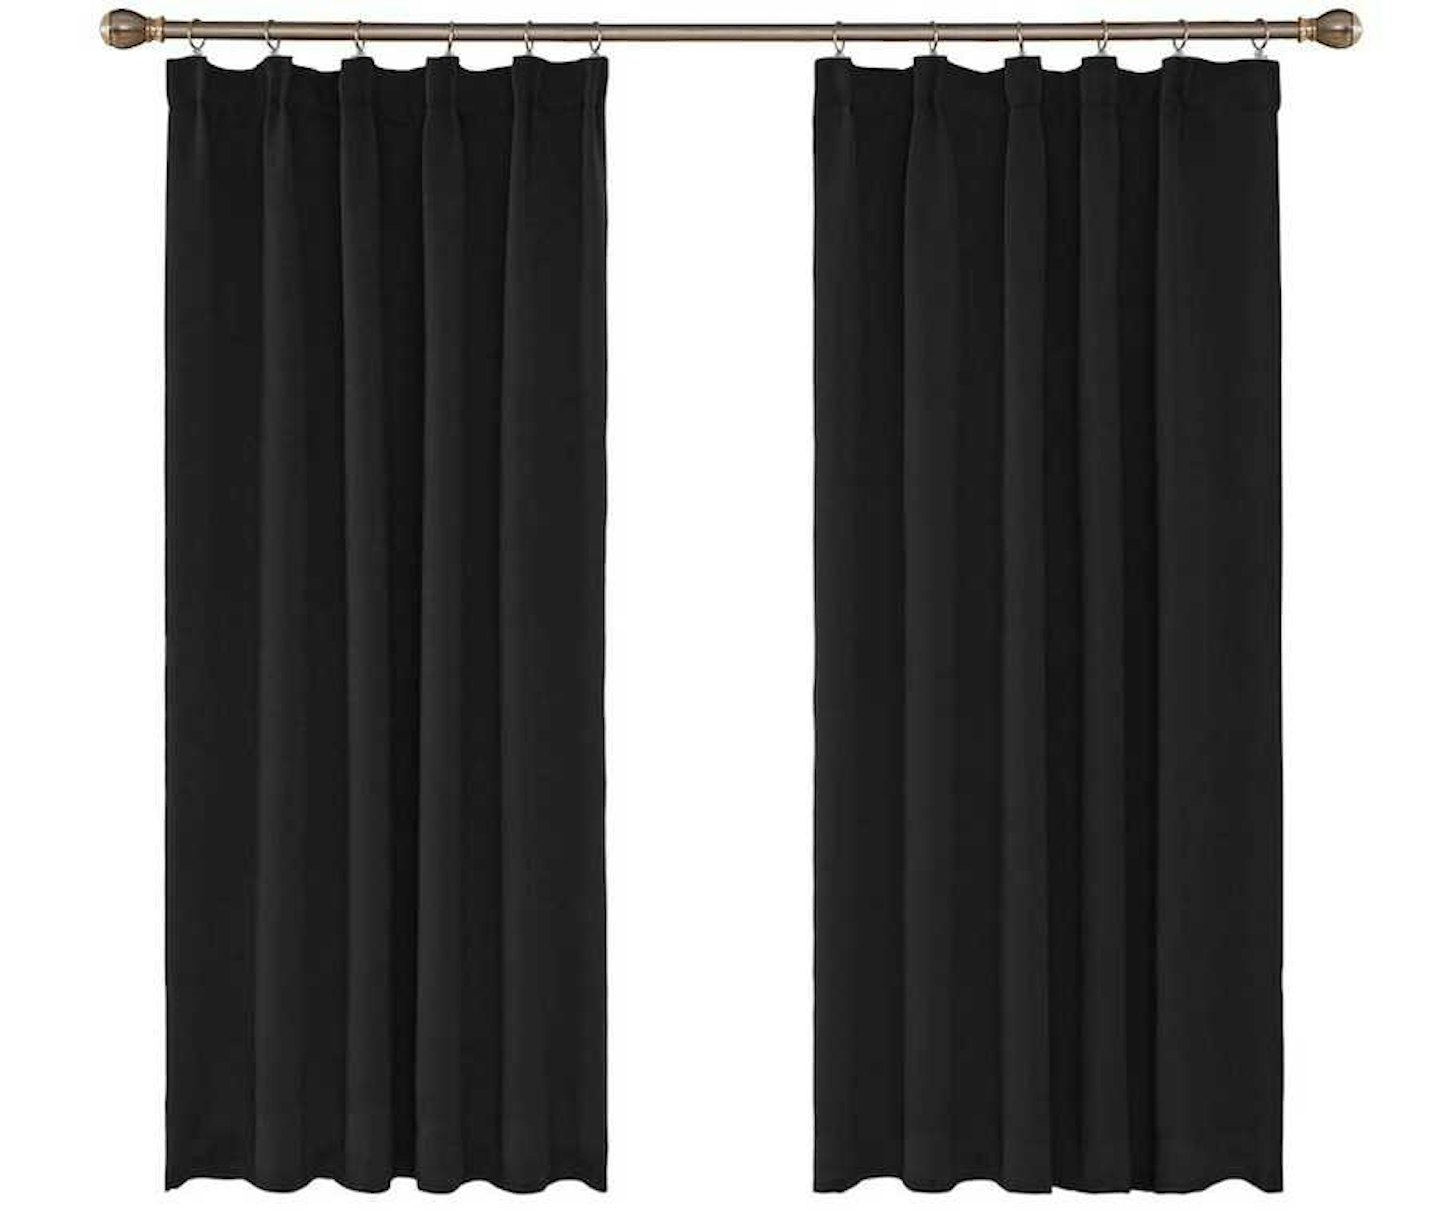 Blackout Curtains, from £19.49